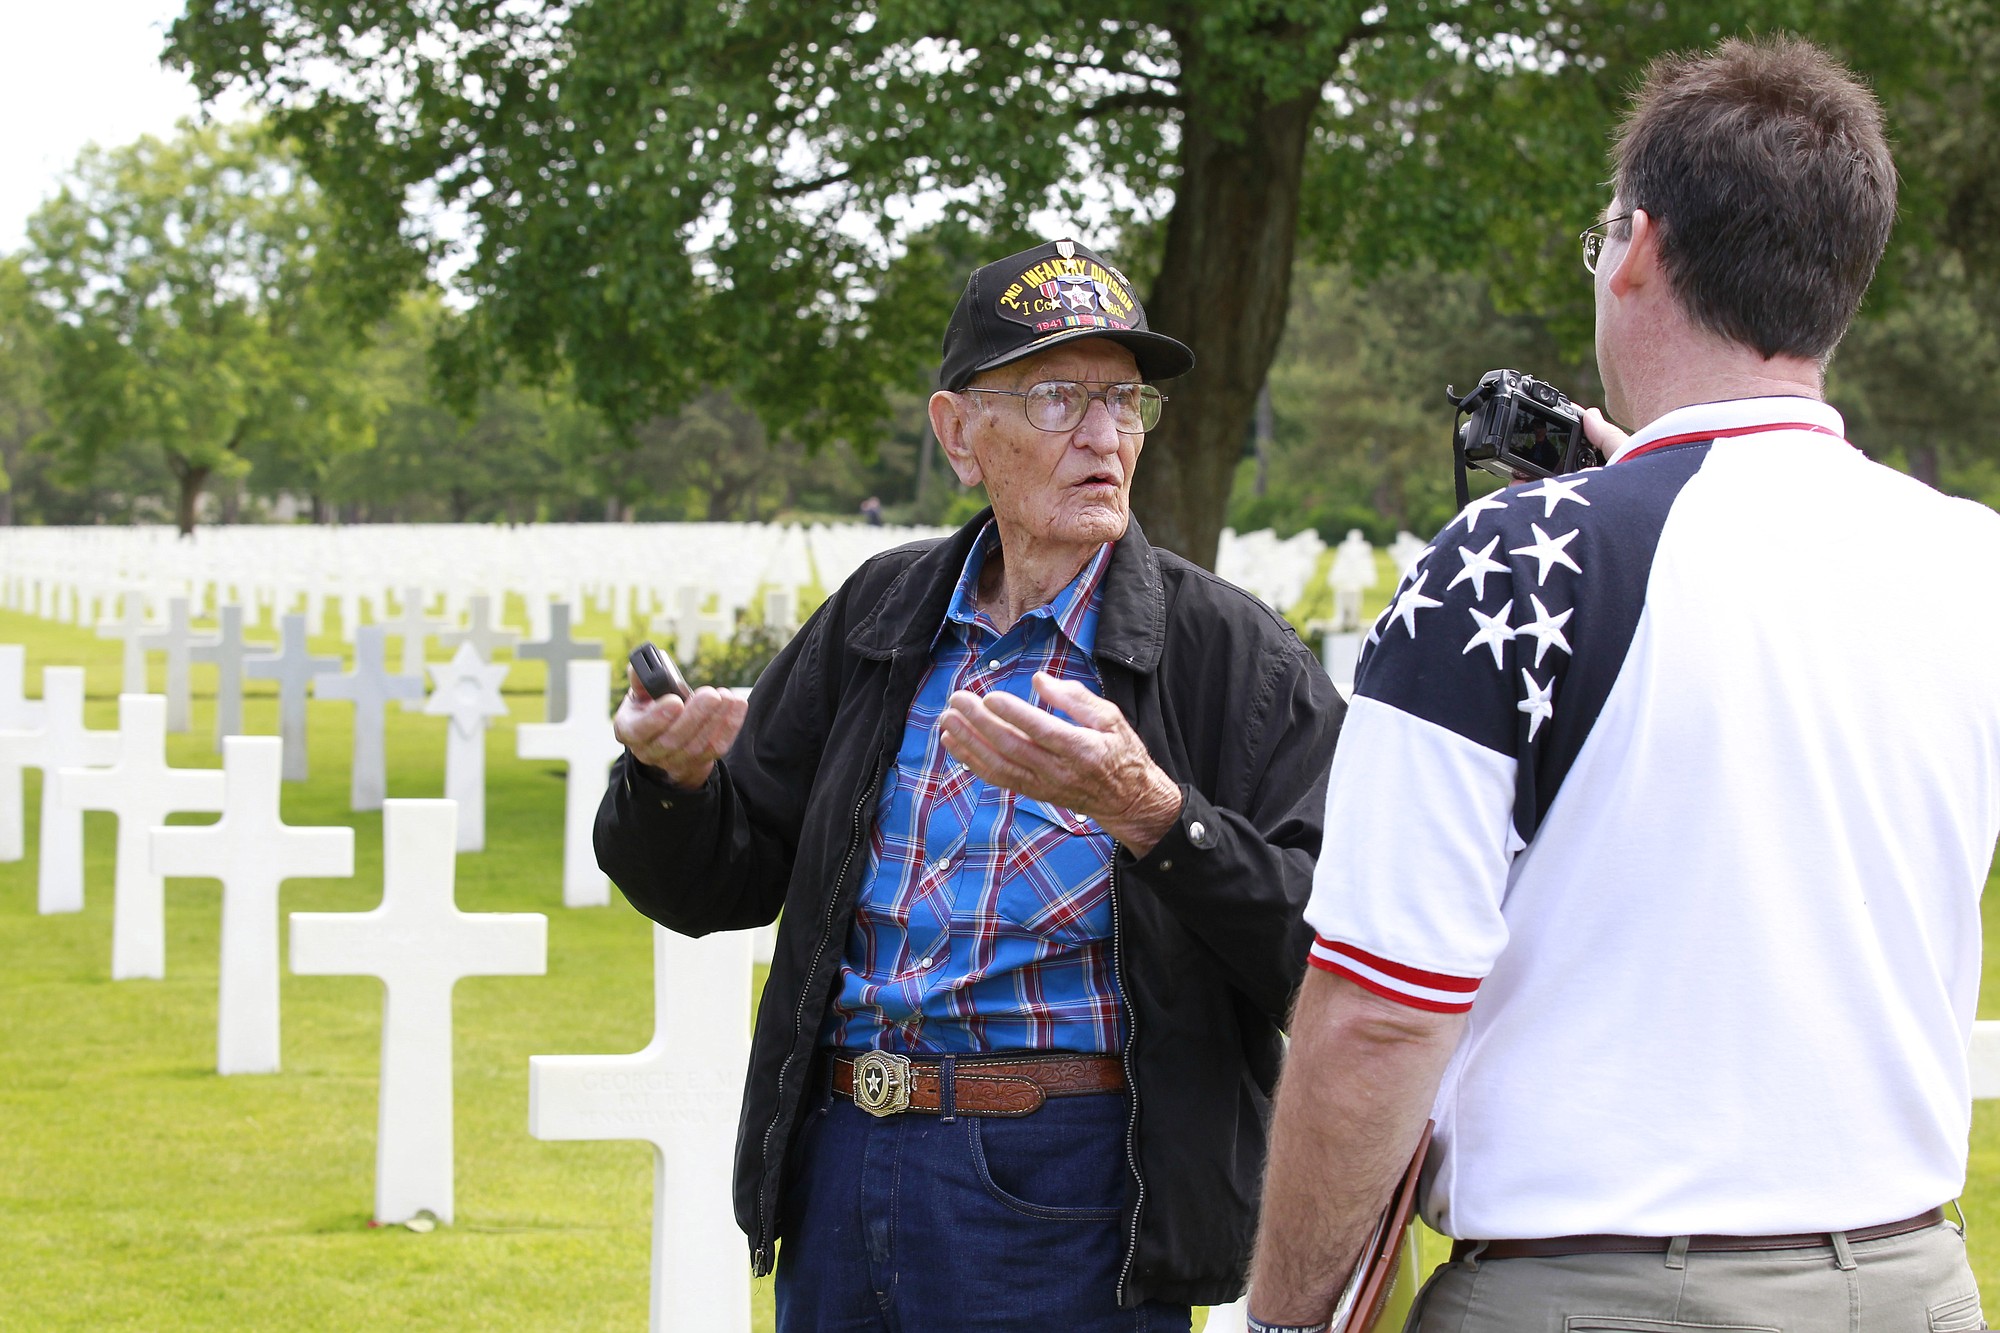 U.S. WW II veteran Thomas N. Oglesby, 95, from Redding, Calif., who belonged to the second infantry division called Indian Head, when he landed on June 7 in Saint Laurent sur Mer, talks with his grandson Mark, a history teacher from Dallas, Texas, at the Colleville American military cemetery, in Colleville sur Mer, western France, Saturday, on the 71st anniversary of the D-Day landing. D-Day marked the start of a Europe invasion, as many thousands of Allied troops began landing on the beaches of Normandy in northern France in 1944 at the start of a major offensive against the Nazi German forces, an offensive which cost the lives of many thousands. Thomas N.